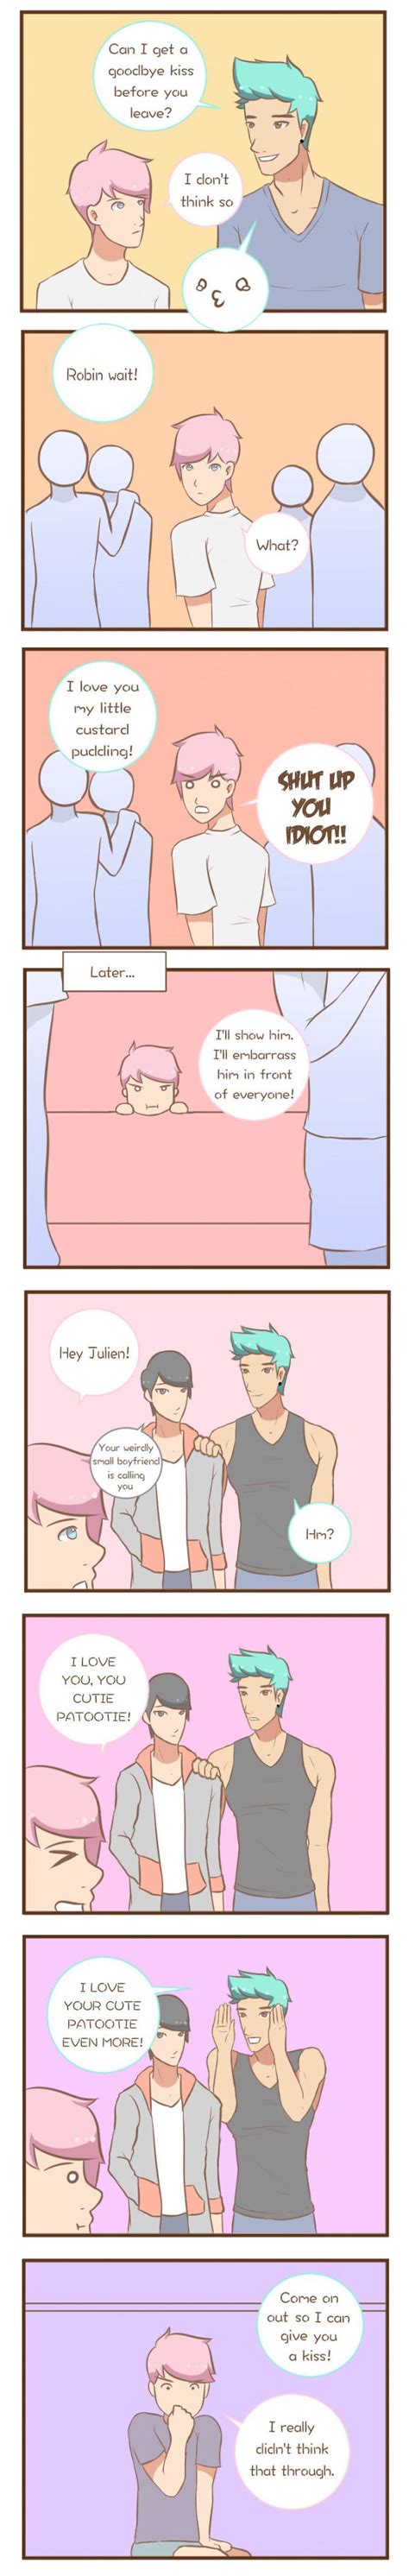 5 Adorable Comics About Gay Couples Everyday Life Bored